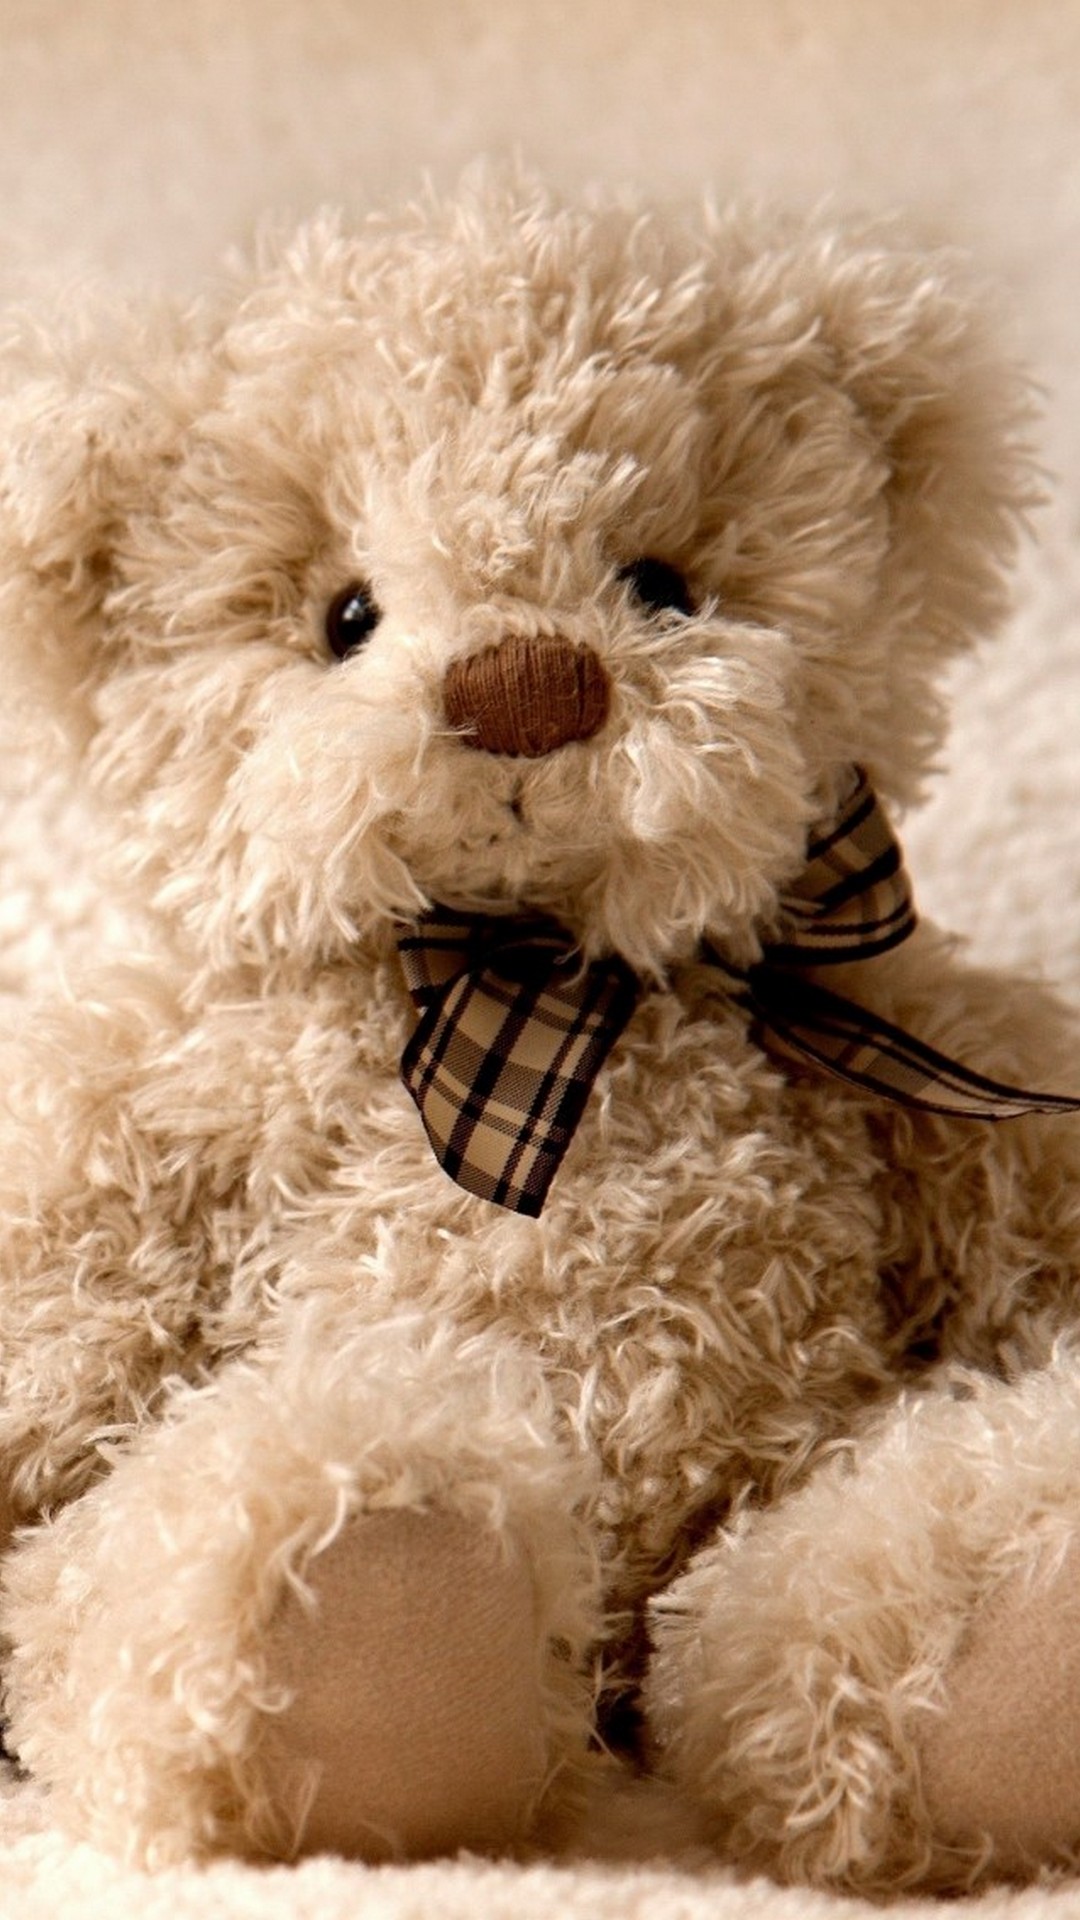 Cute Teddy Bear iPhone Wallpaper with image resolution 1080x1920 pixel. You can make this wallpaper for your iPhone 5, 6, 7, 8, X backgrounds, Mobile Screensaver, or iPad Lock Screen